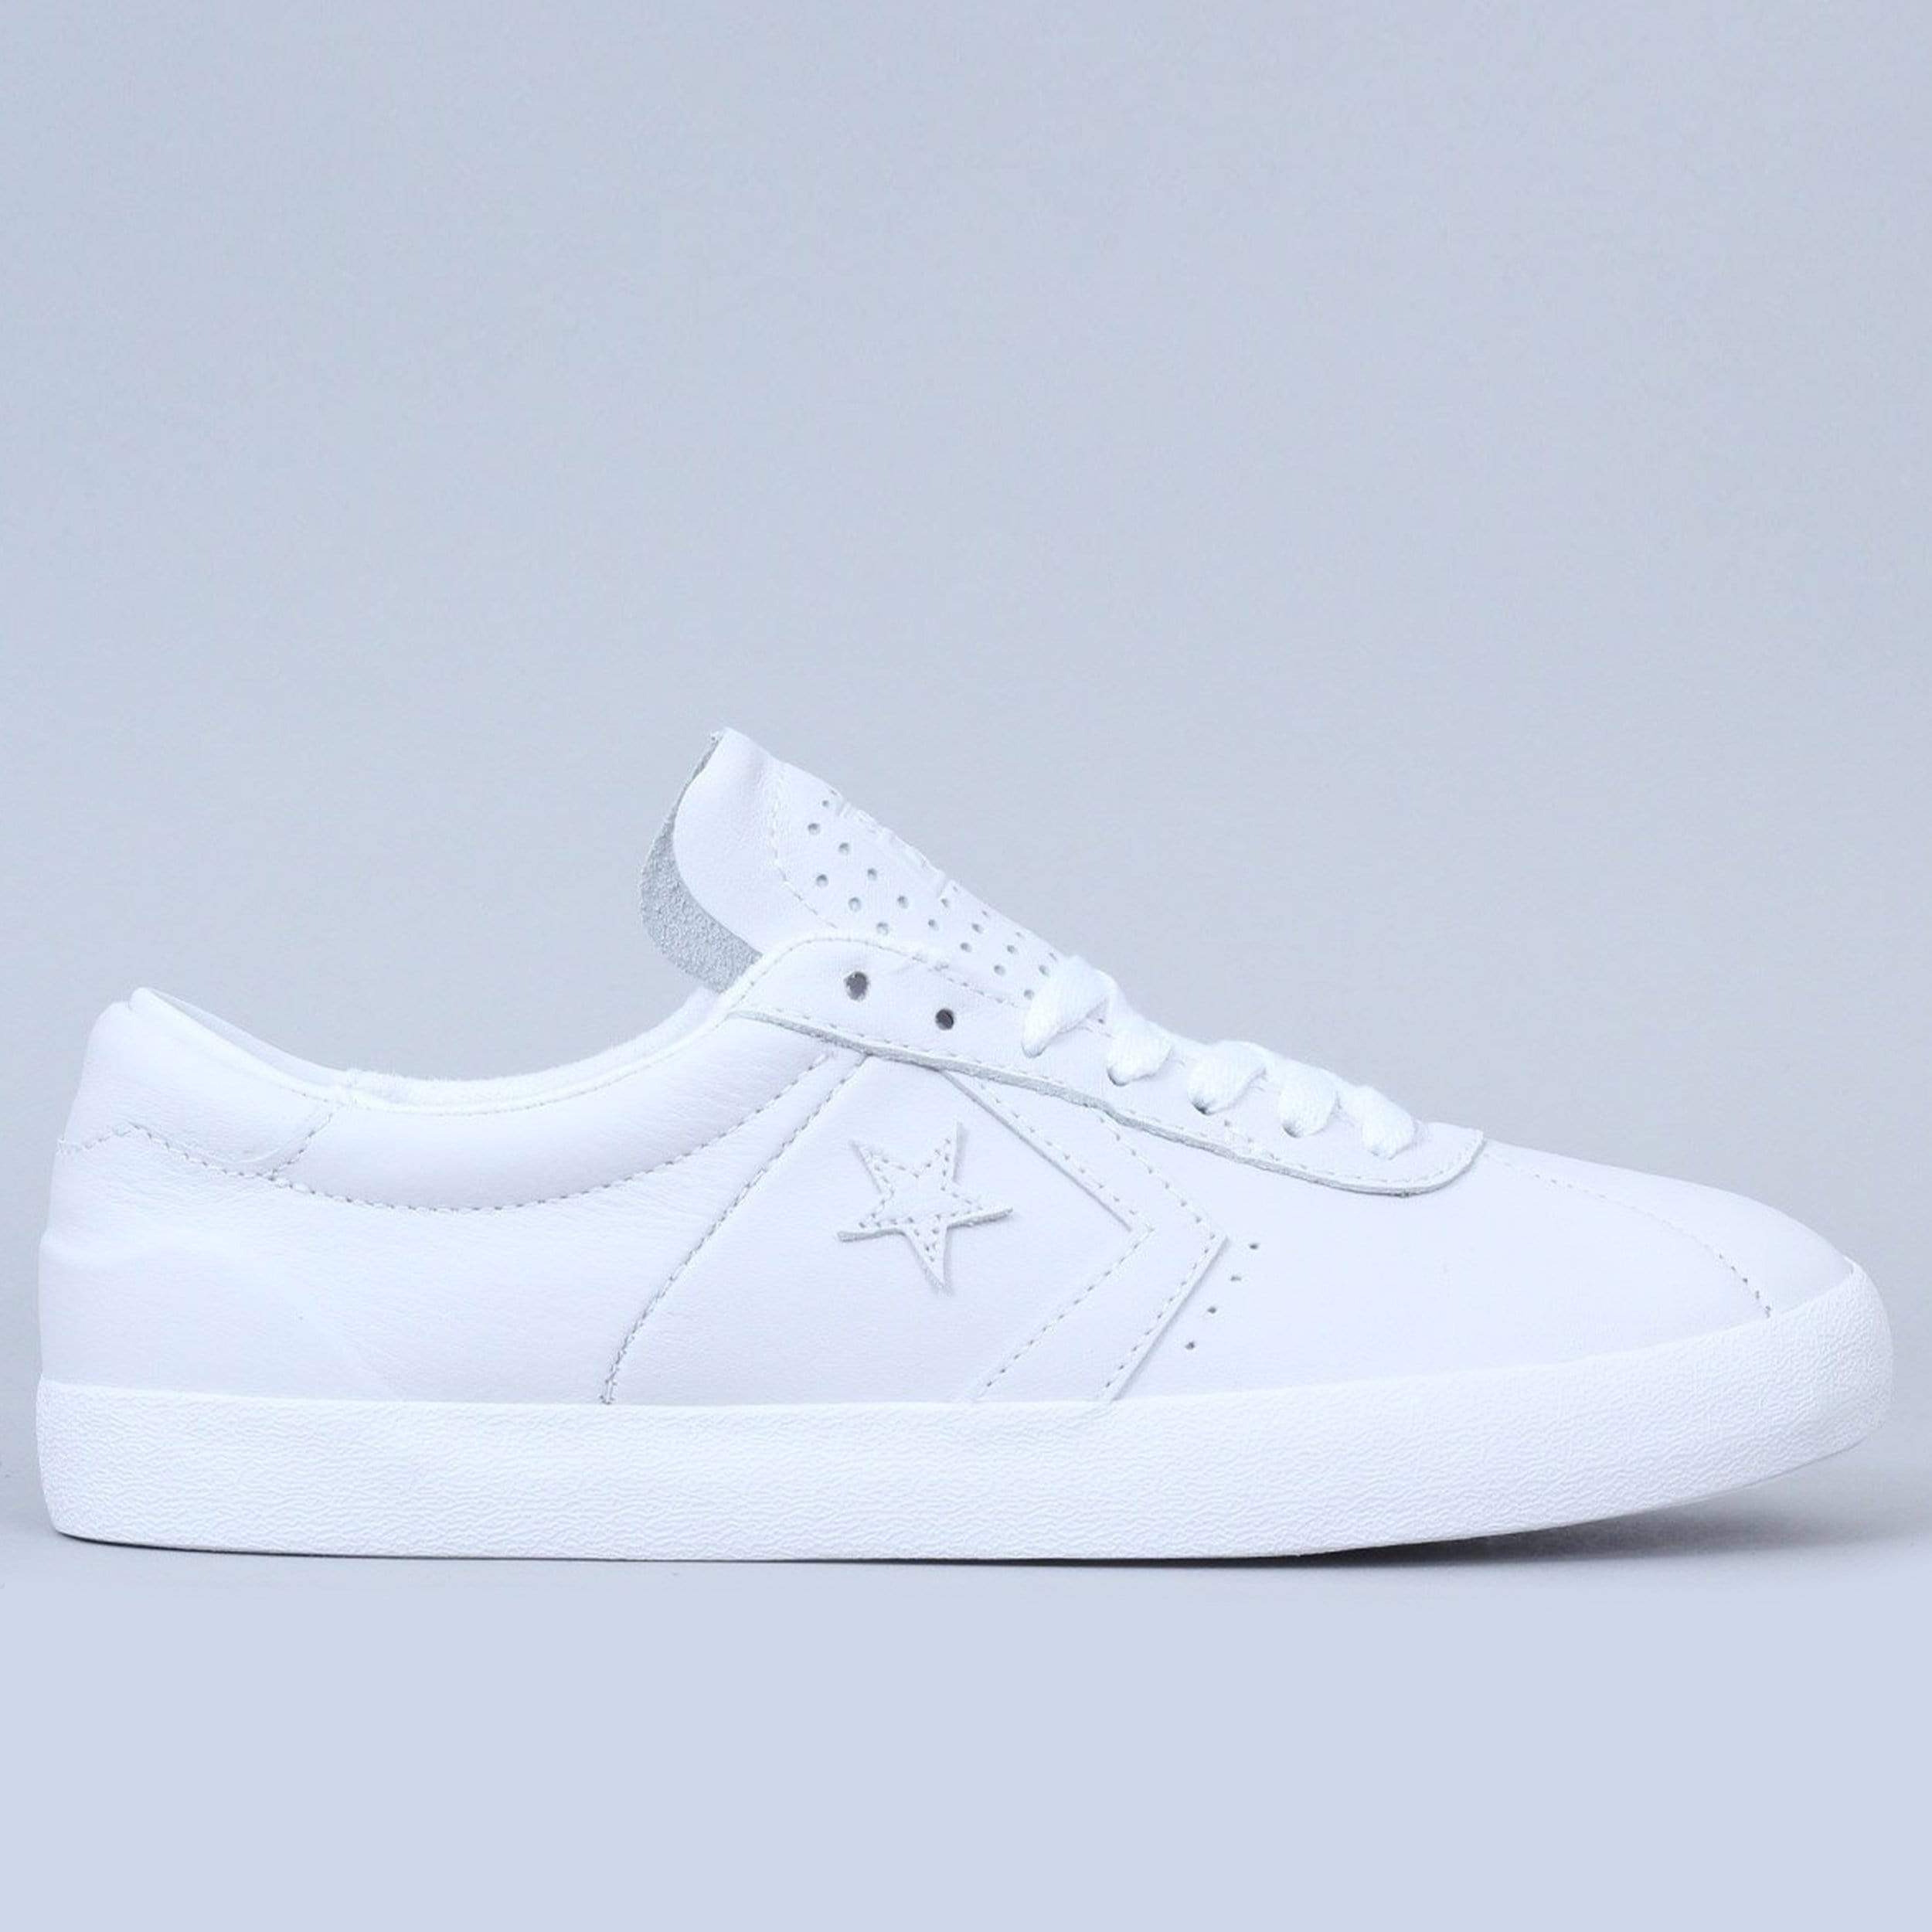 mover Synslinie Marvel Converse Breakpoint Pro OX Shoes White / White / White - Slam City Skates